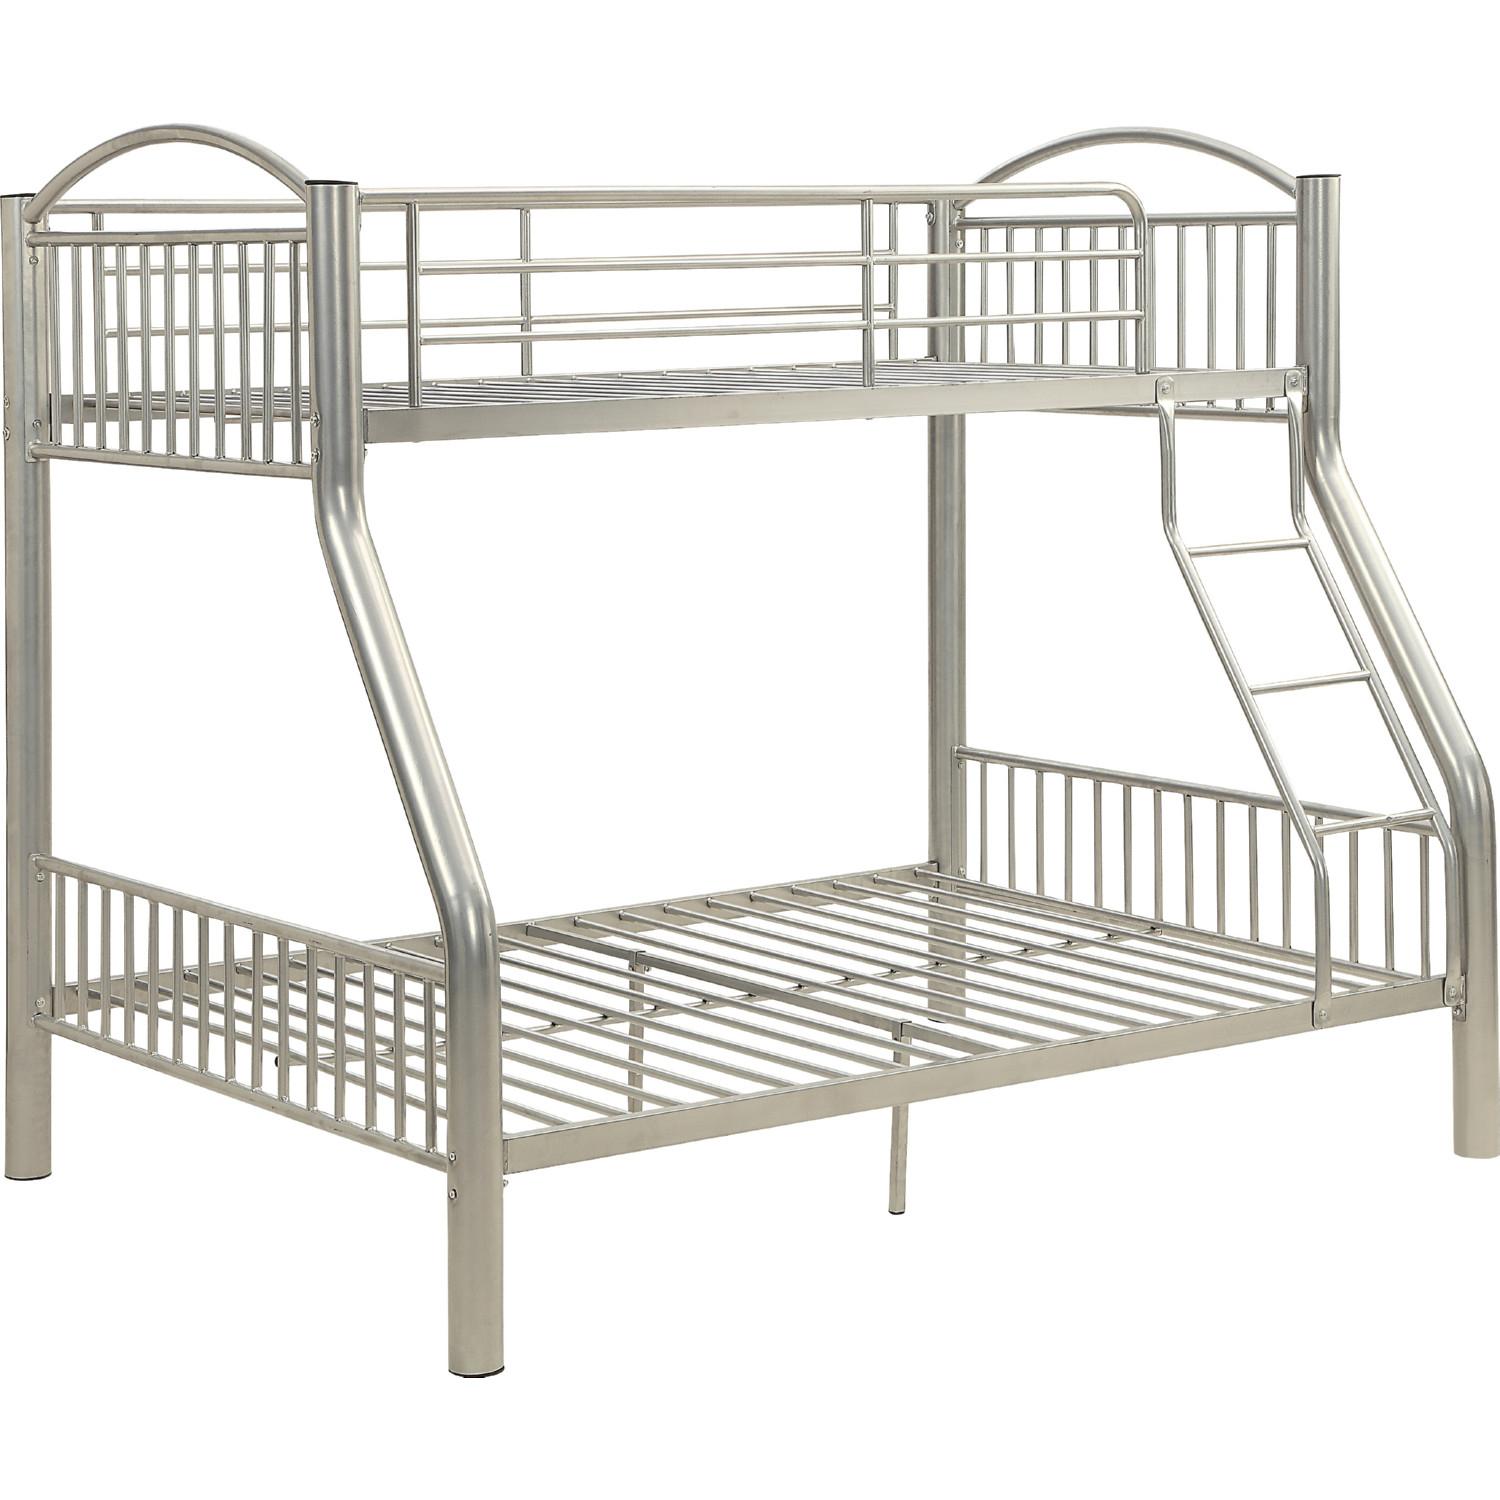 Simple Twin/Full Bunk Bed Cayelynn 37380SI in Silver 